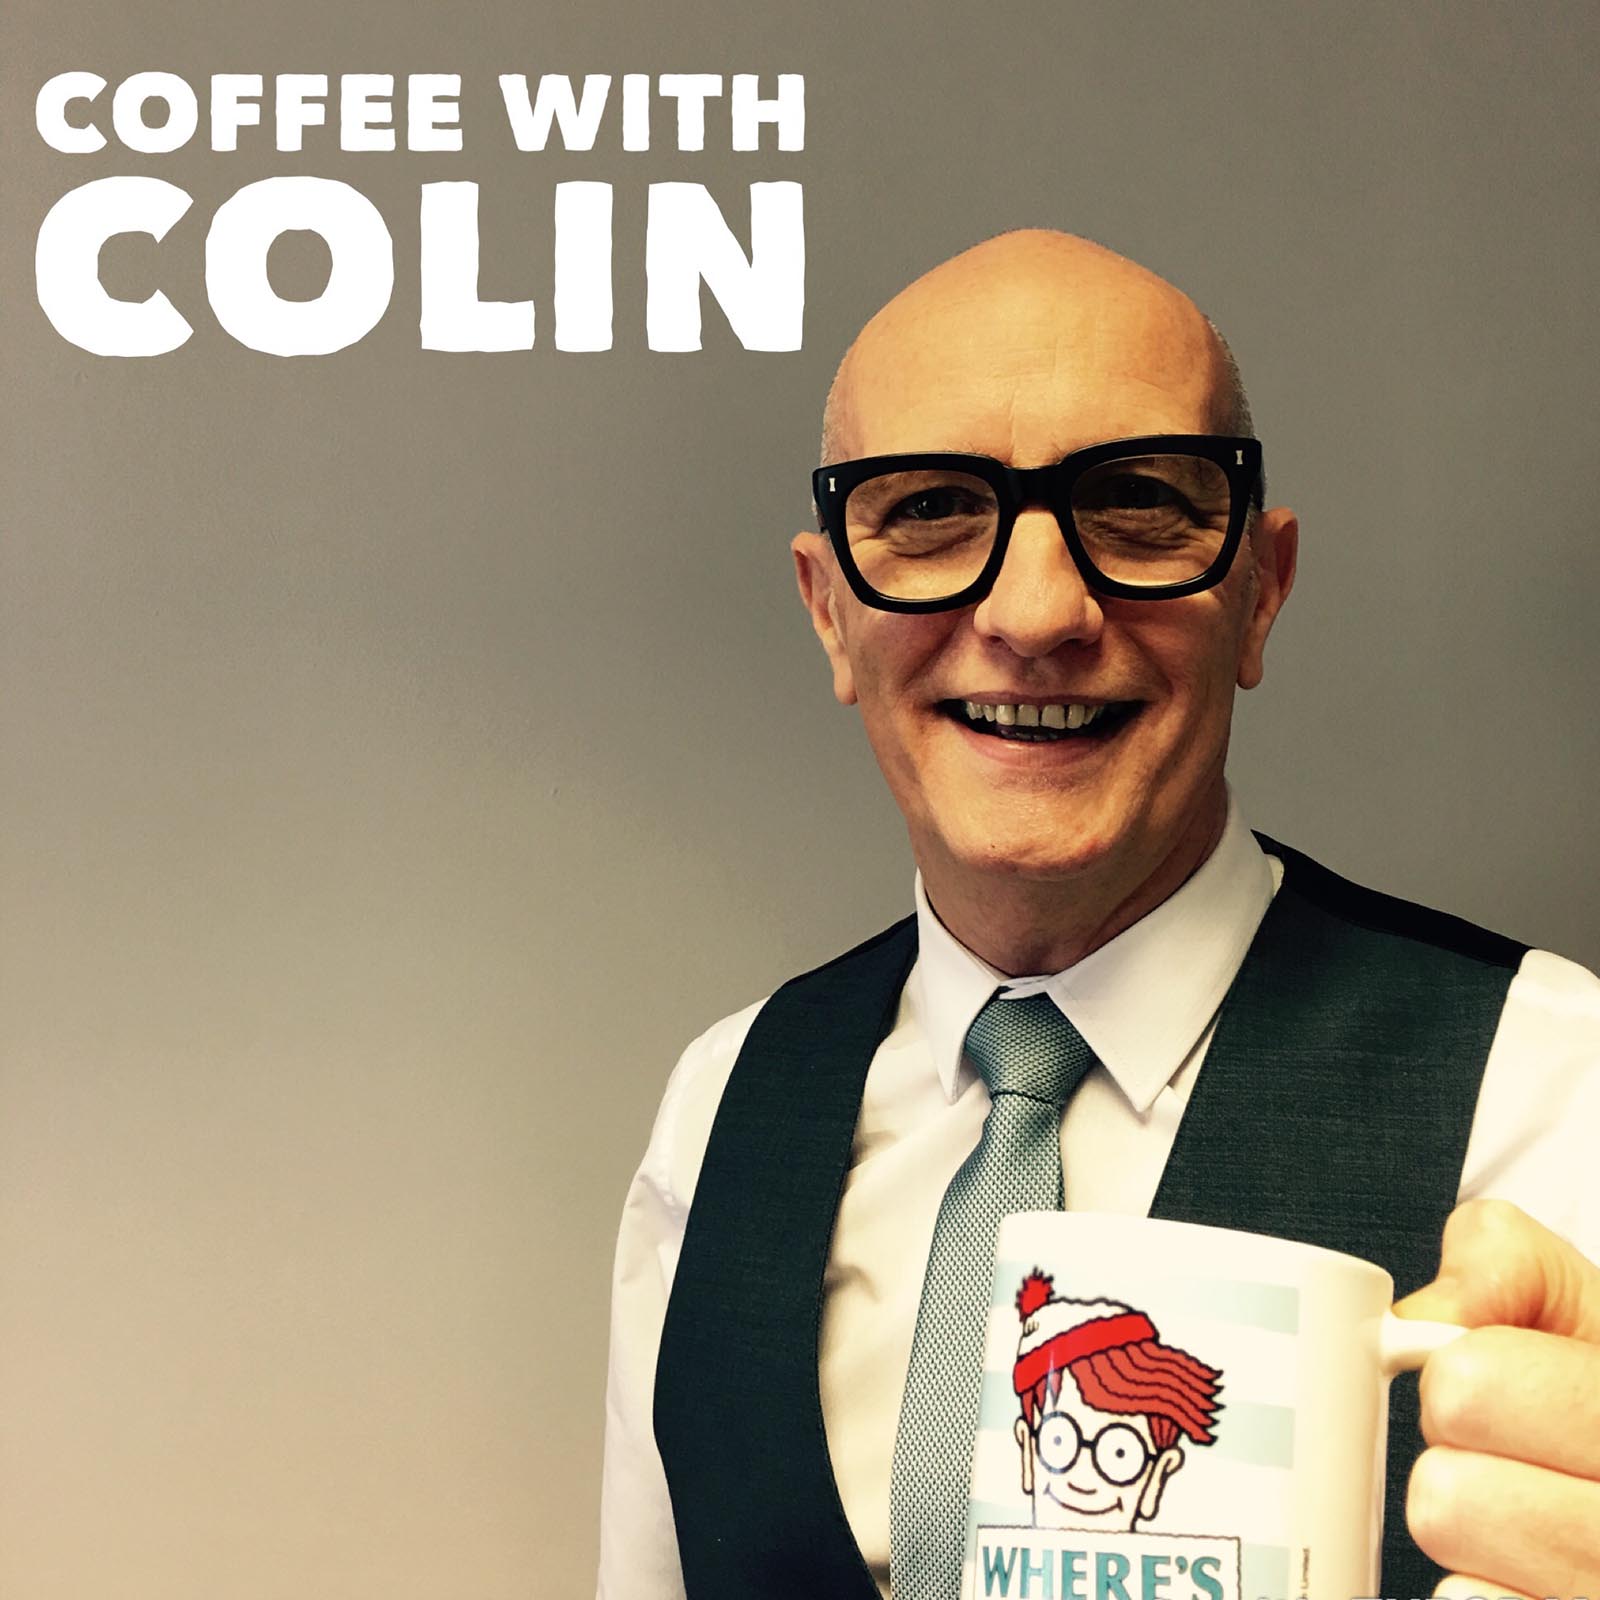 NEWRY AND PORTRUSH - HAVE A COFFEE WITH COLIN THIS WEEK